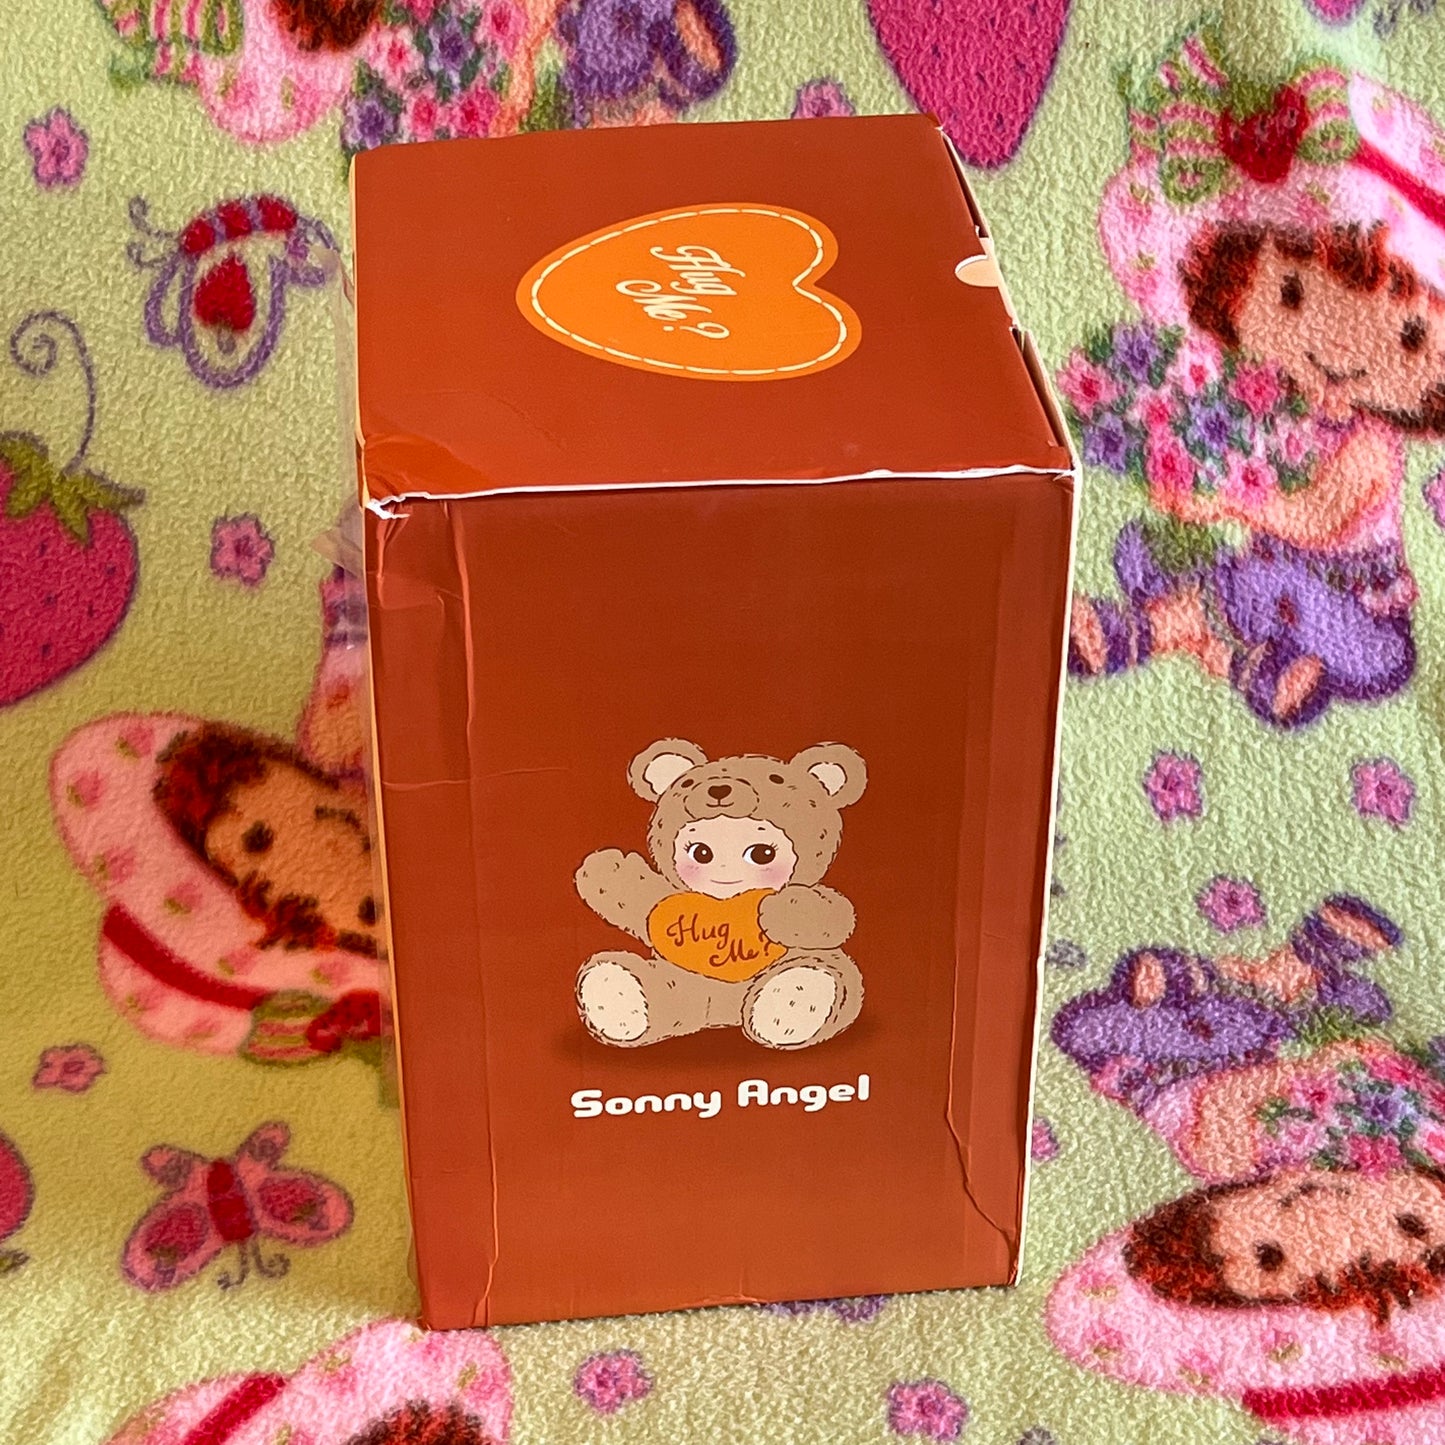 Sonny Angel Brown Cuddly Bear Plush Collection